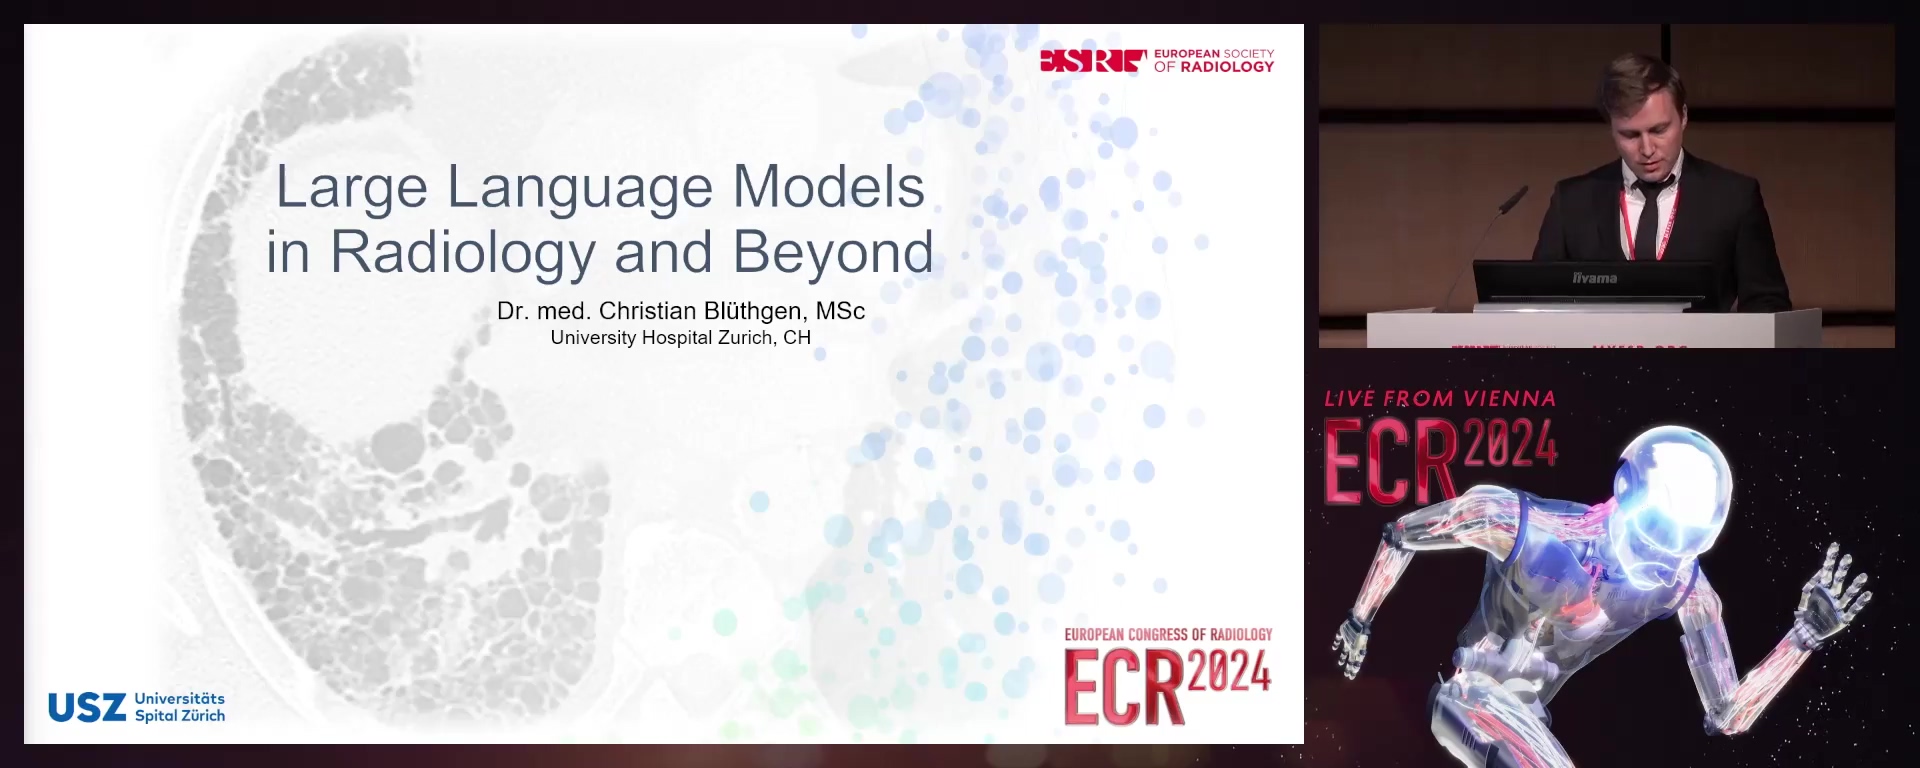 Large language models in radiology and beyond